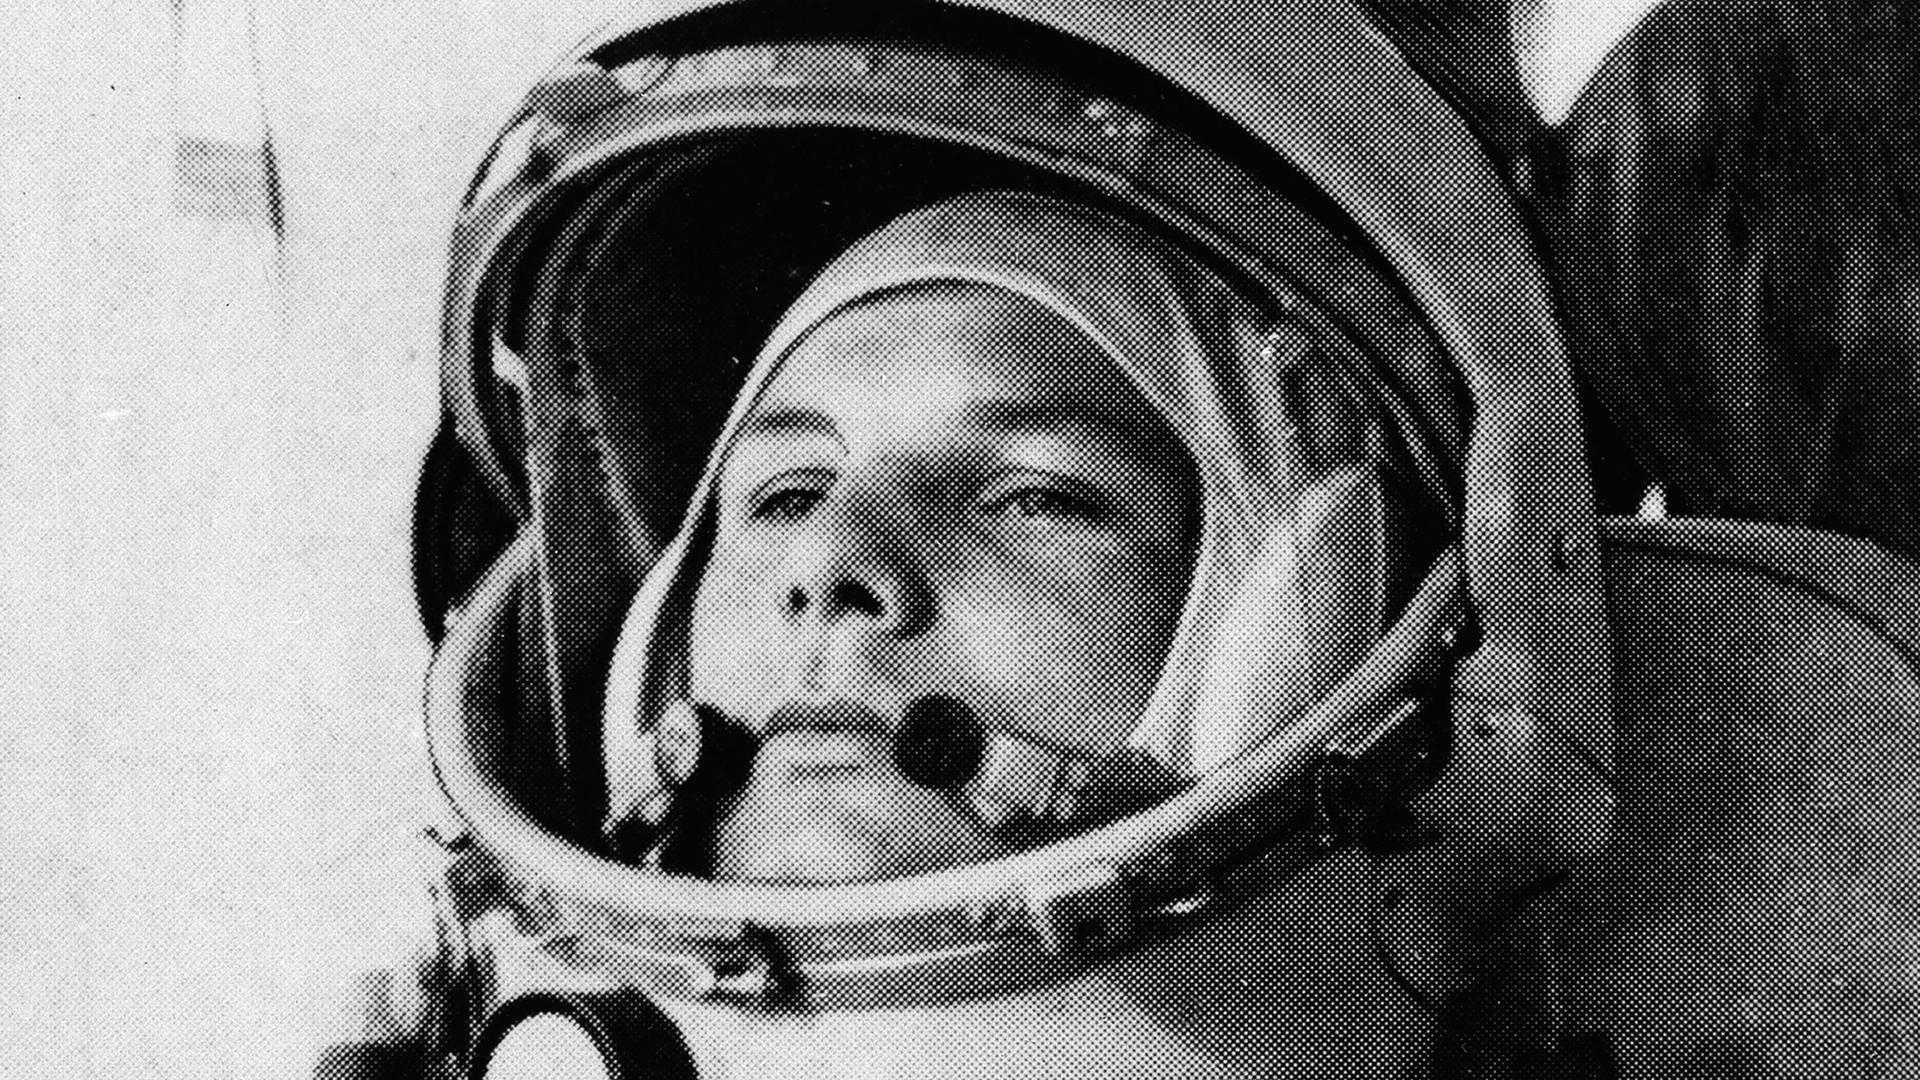 Soviet cosmonaut Major Yuri Gagarin is shown in a black and white portrait photograph wearing a space helmet with the visor open.